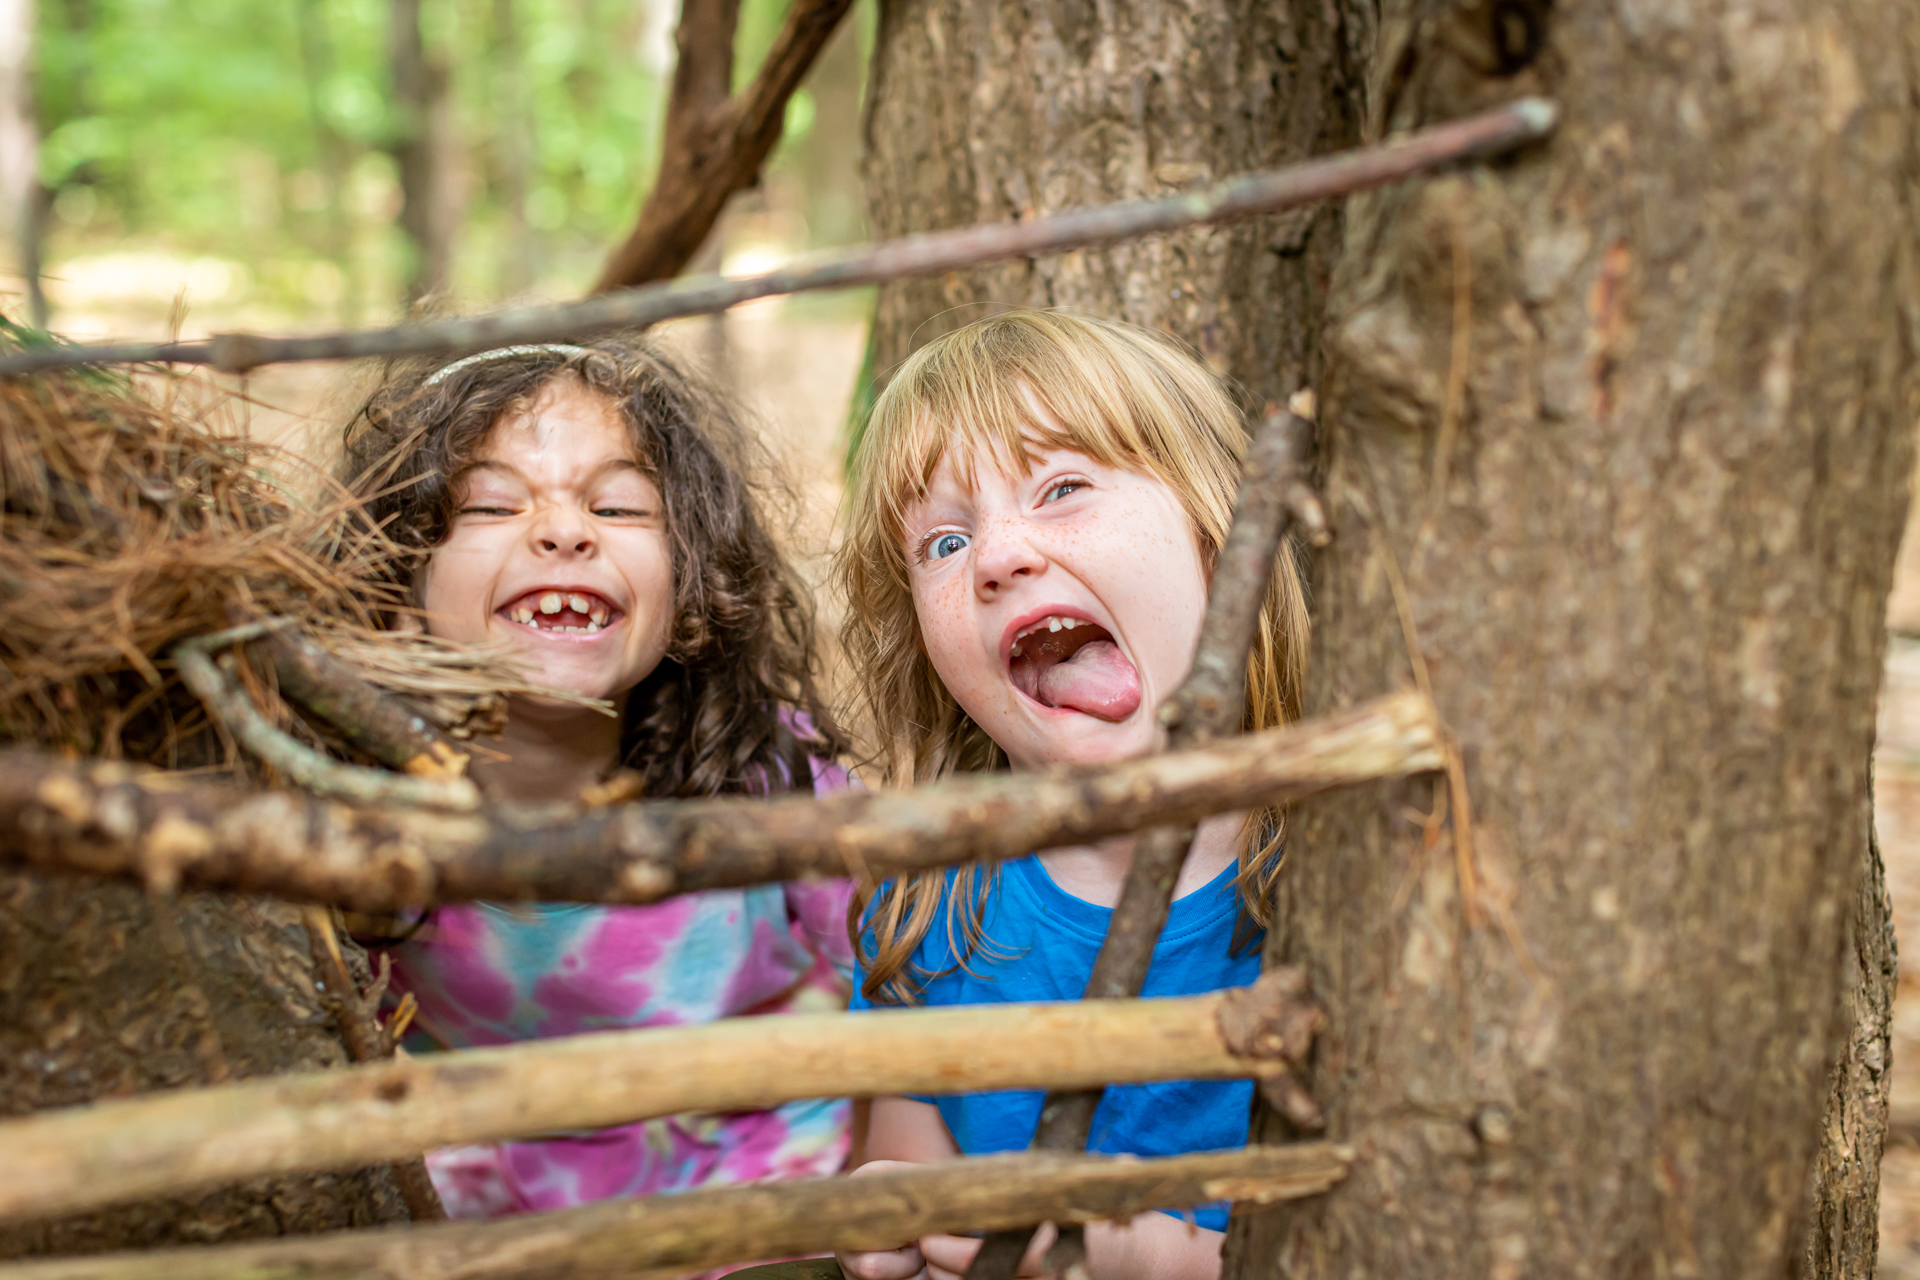 Two campers at Arcadia Nature Camp make silly faces for the camera from inside a shelter they've made using branches and twigs wedged between trees